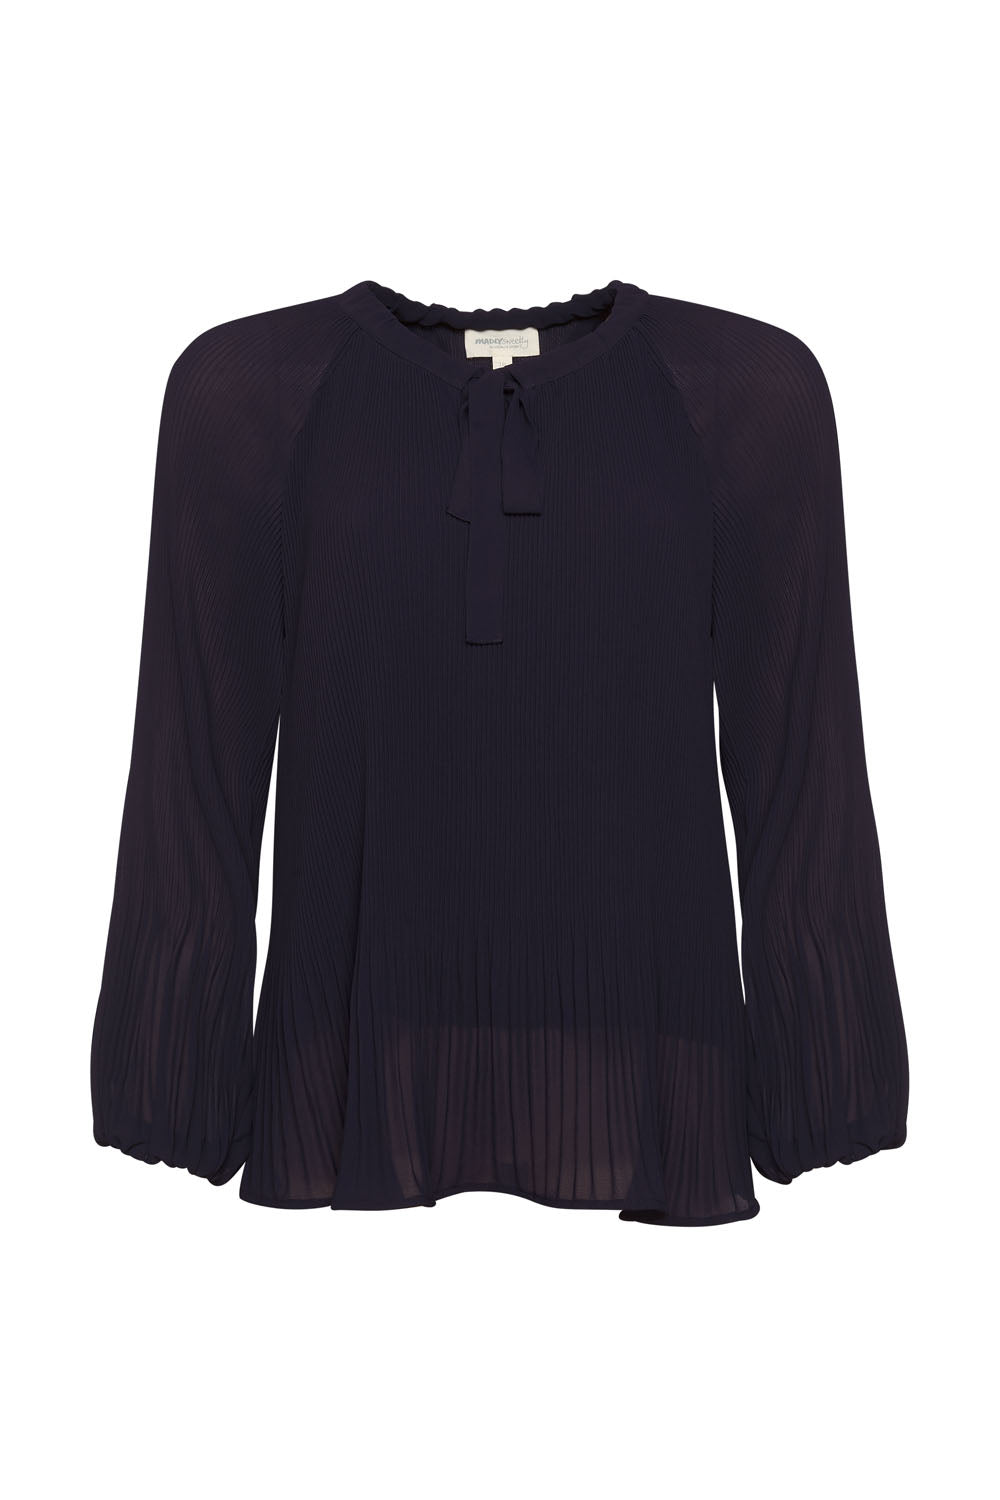 Madly Sweetly Just Pleat It Top - Navy